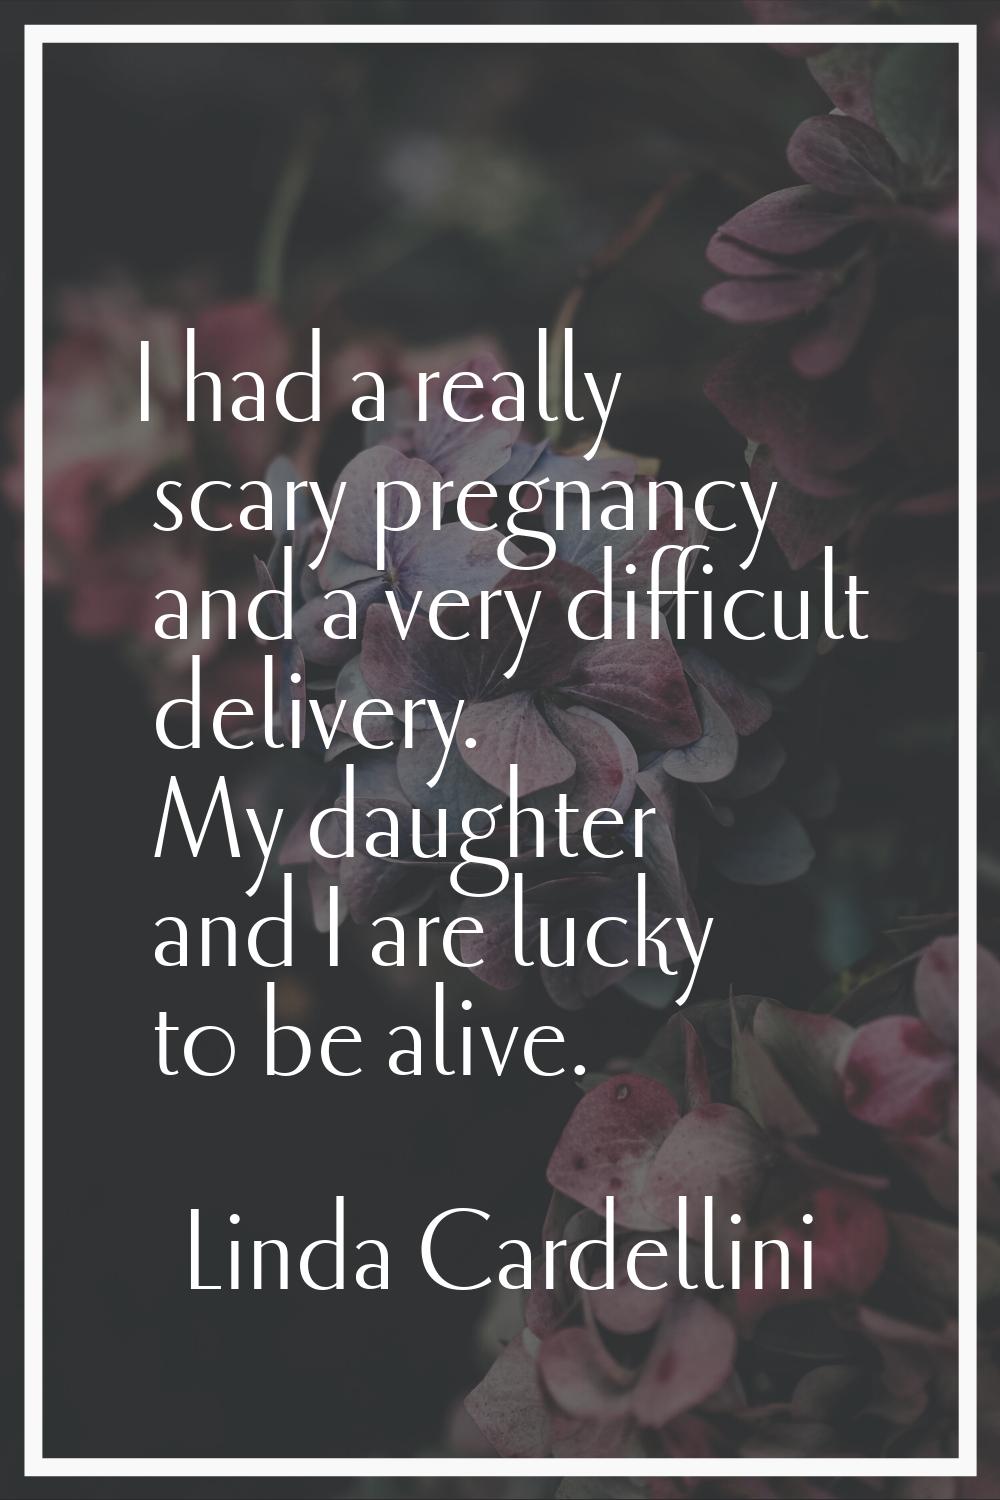 I had a really scary pregnancy and a very difficult delivery. My daughter and I are lucky to be ali